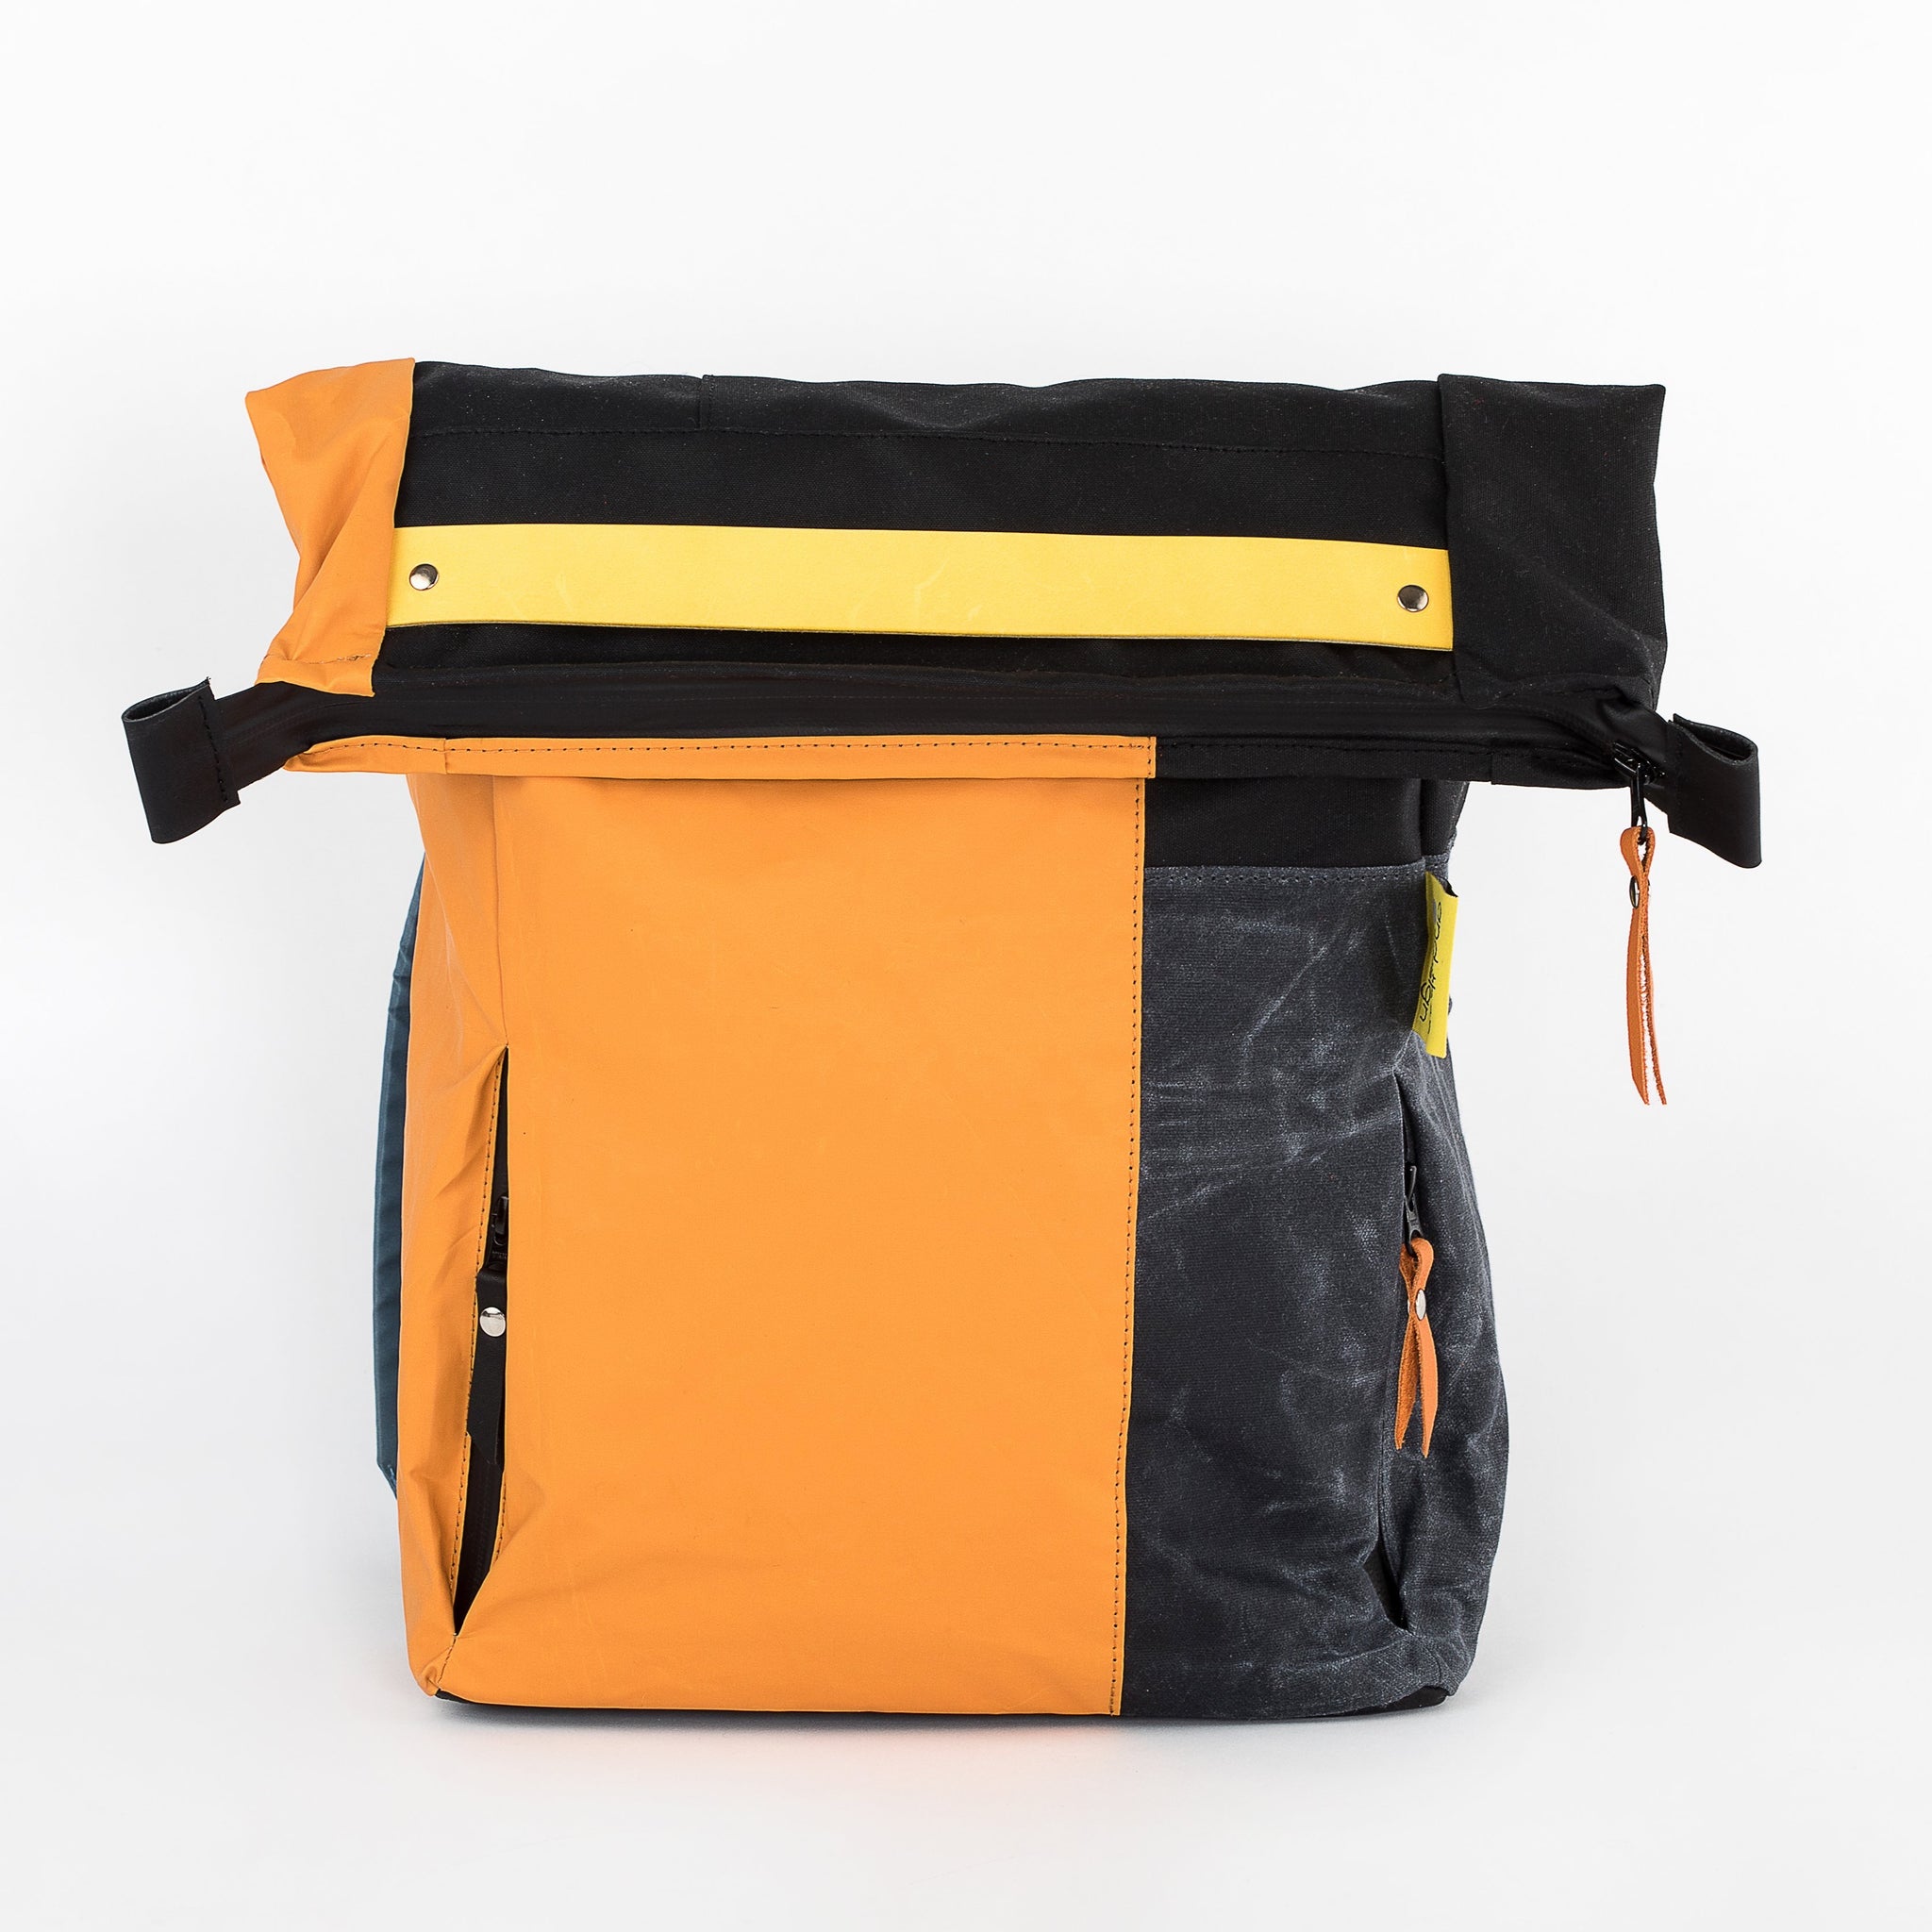 andthen.design an evolution of Vel-Oh.com-FlopTop | Backpack zero-1 colourblock backpack, colorblock backpack, odd straps, zero waste backpack, handmade backpack using off cuts